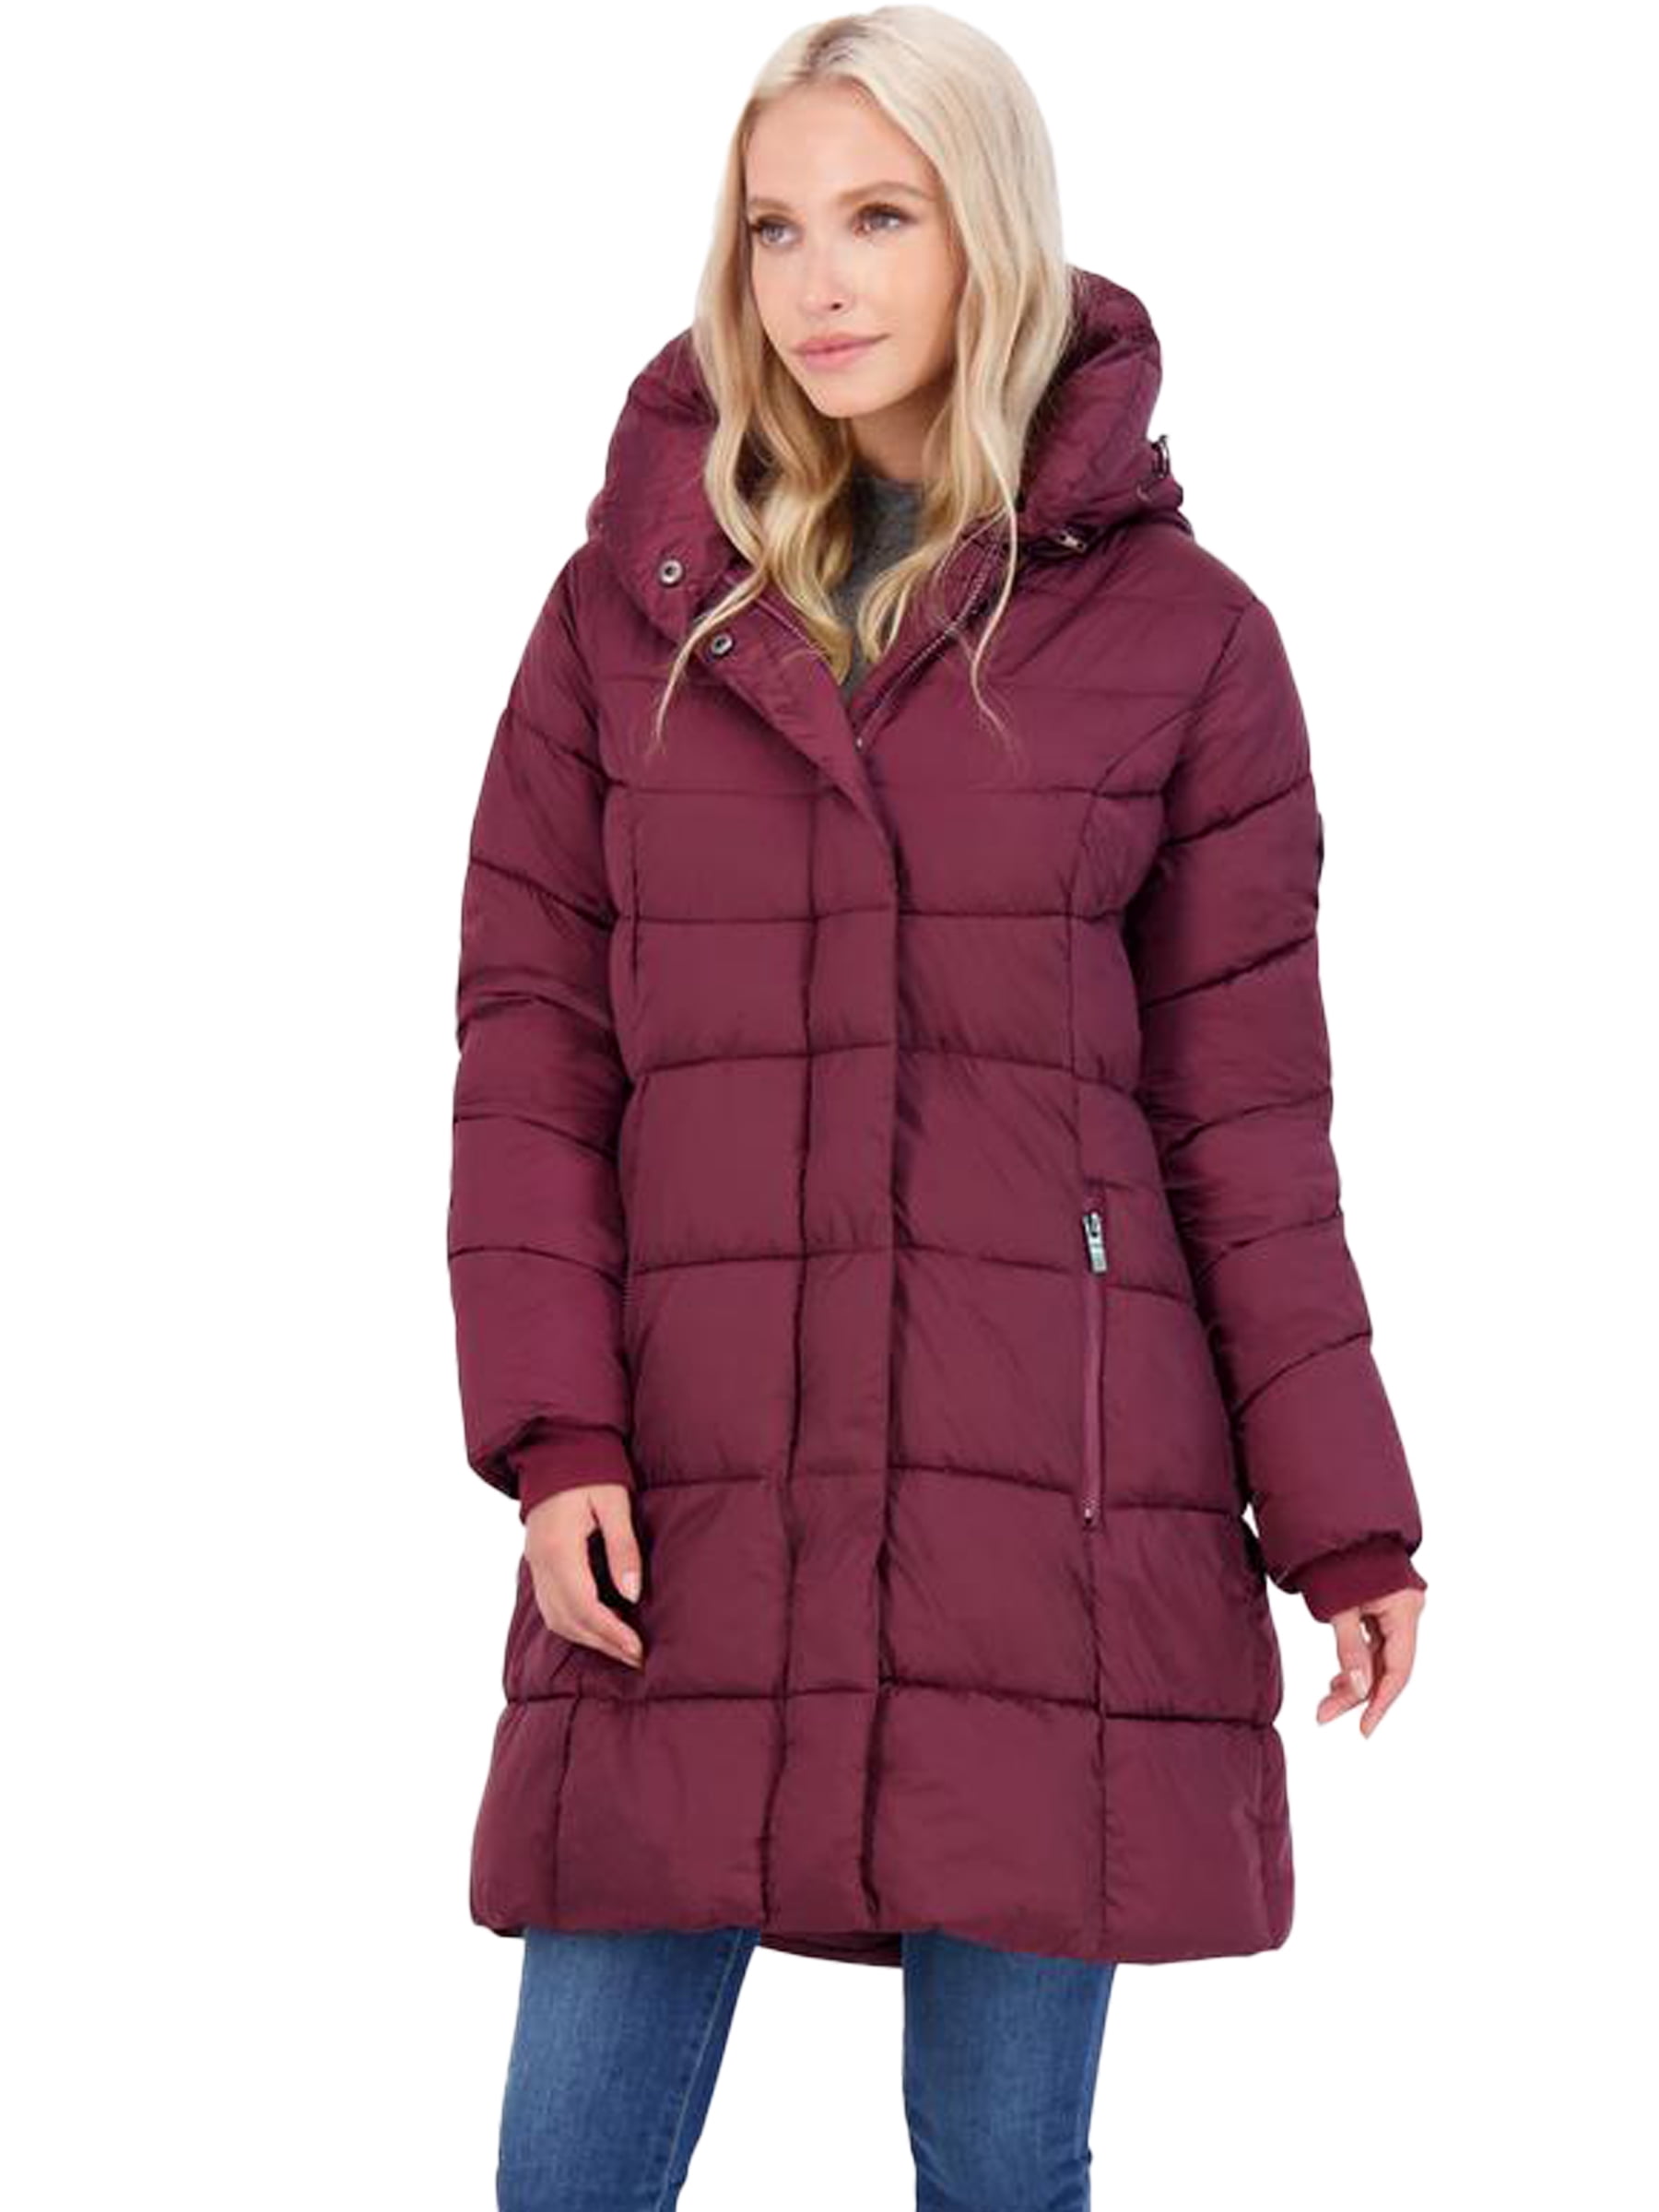 Steve Madden Puffer Coat for Women-Quilted Winter Jacket with Pillow ...